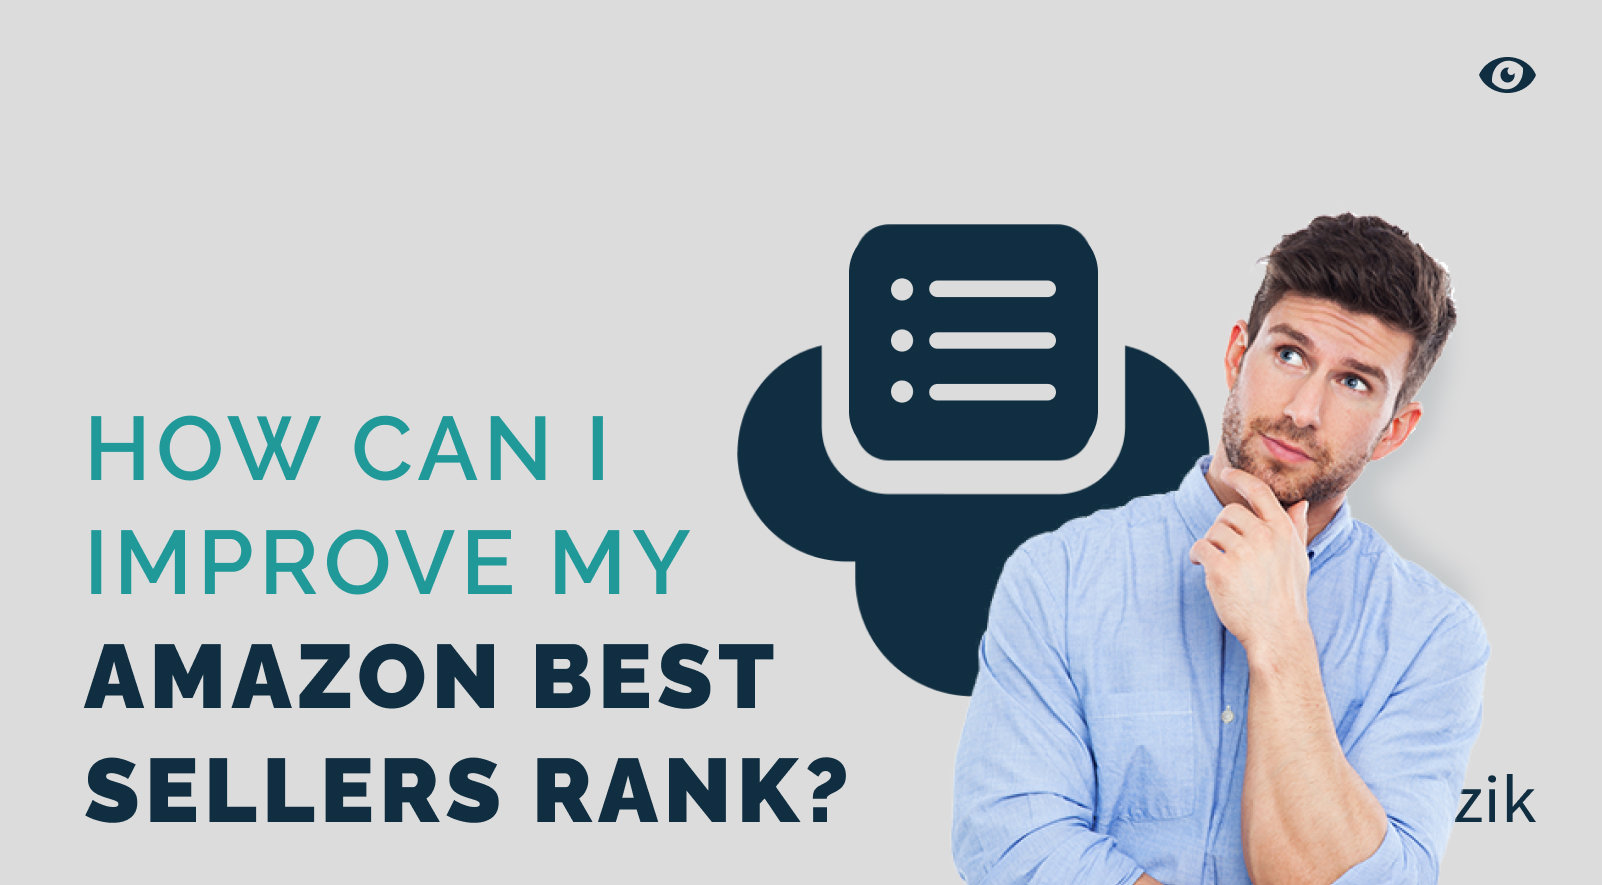 What is  BSR (Best Sellers Rank)?